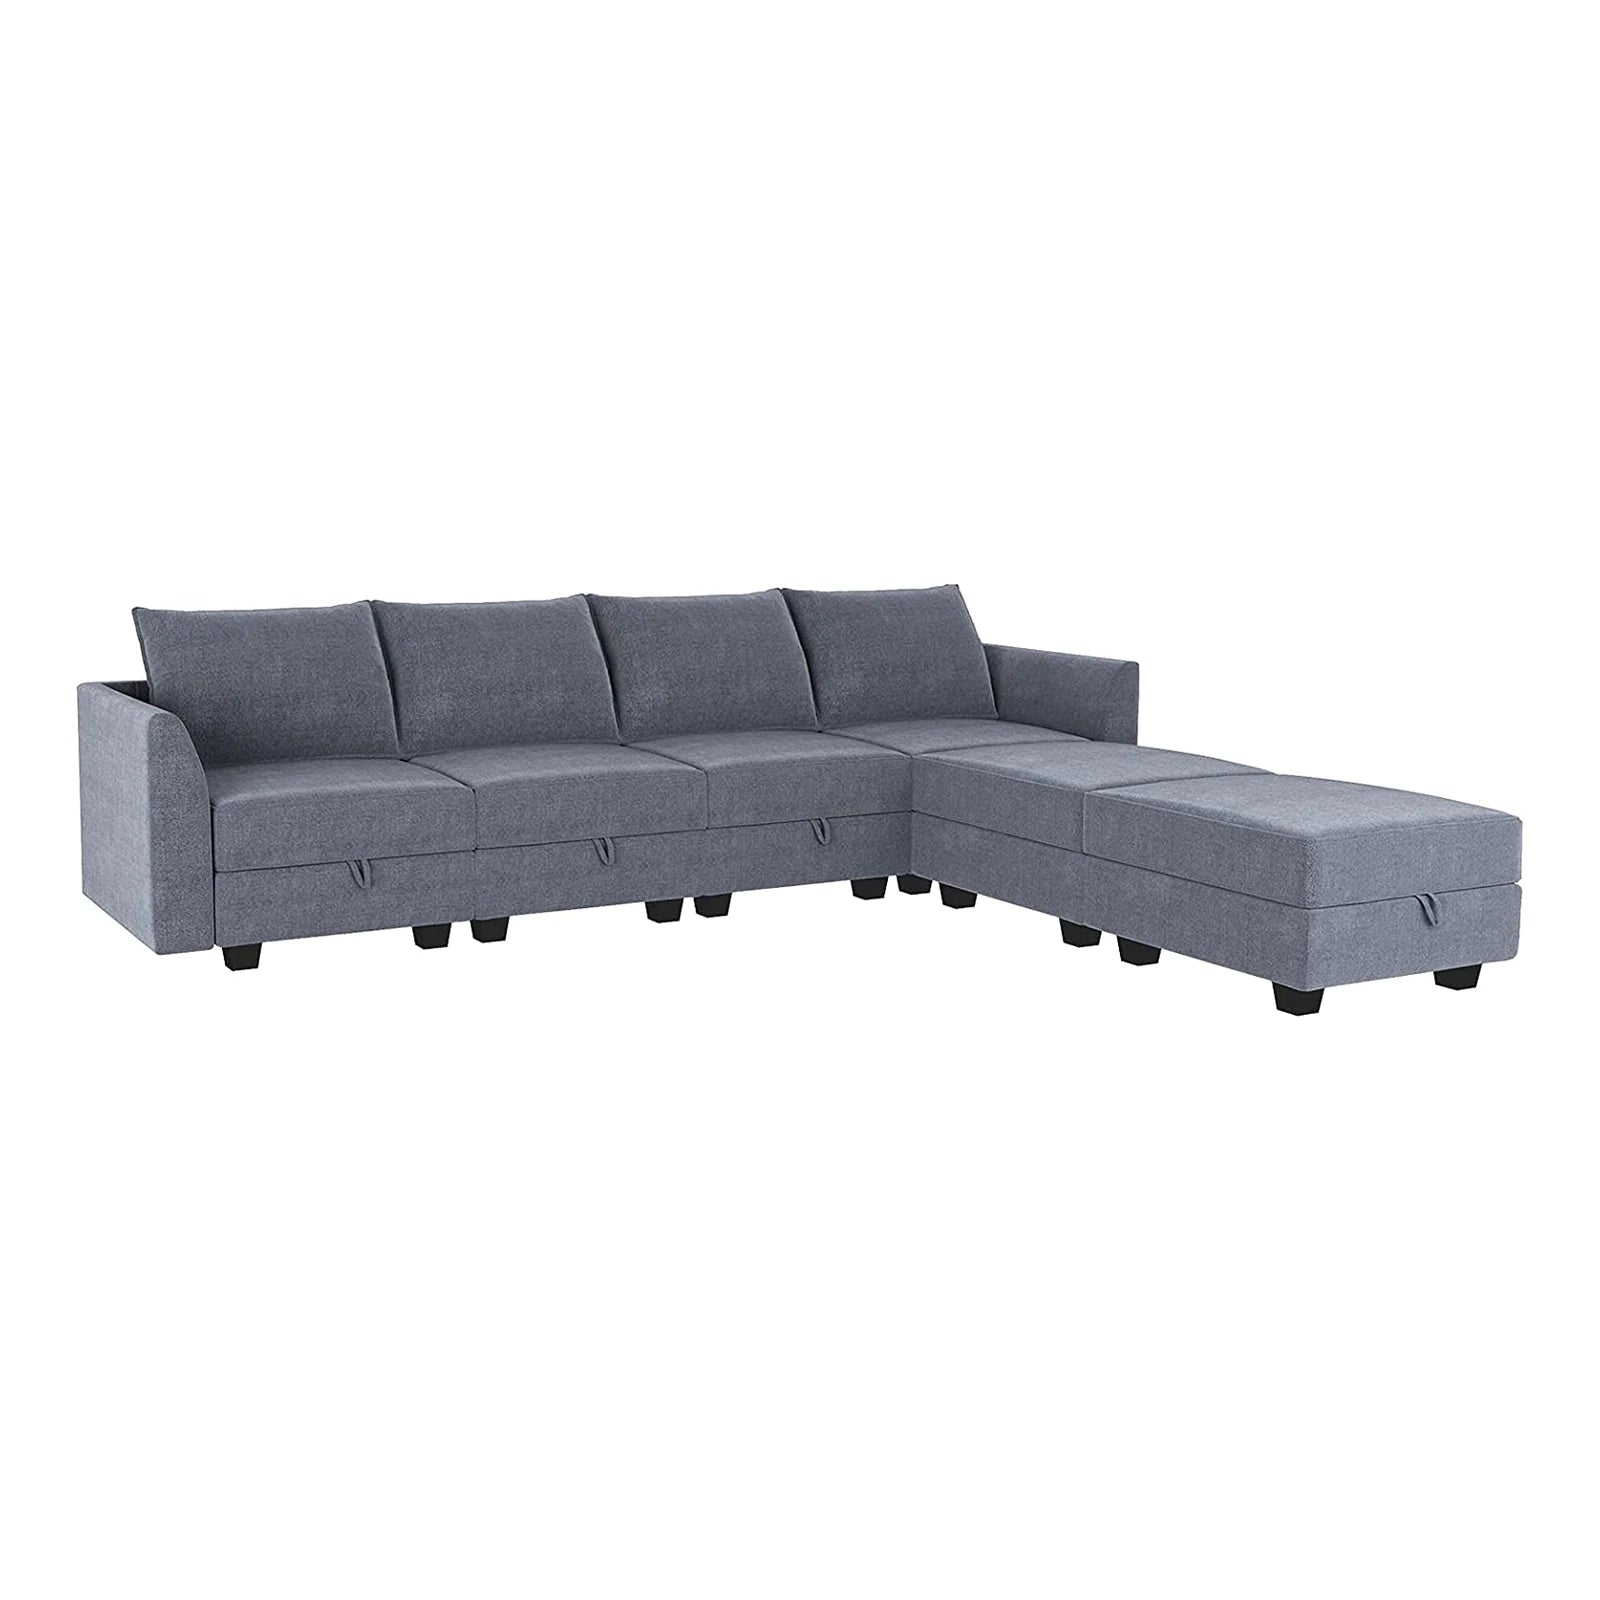 Convertible and Modular Sectional Sofa Reversible Chaise with Ottomans